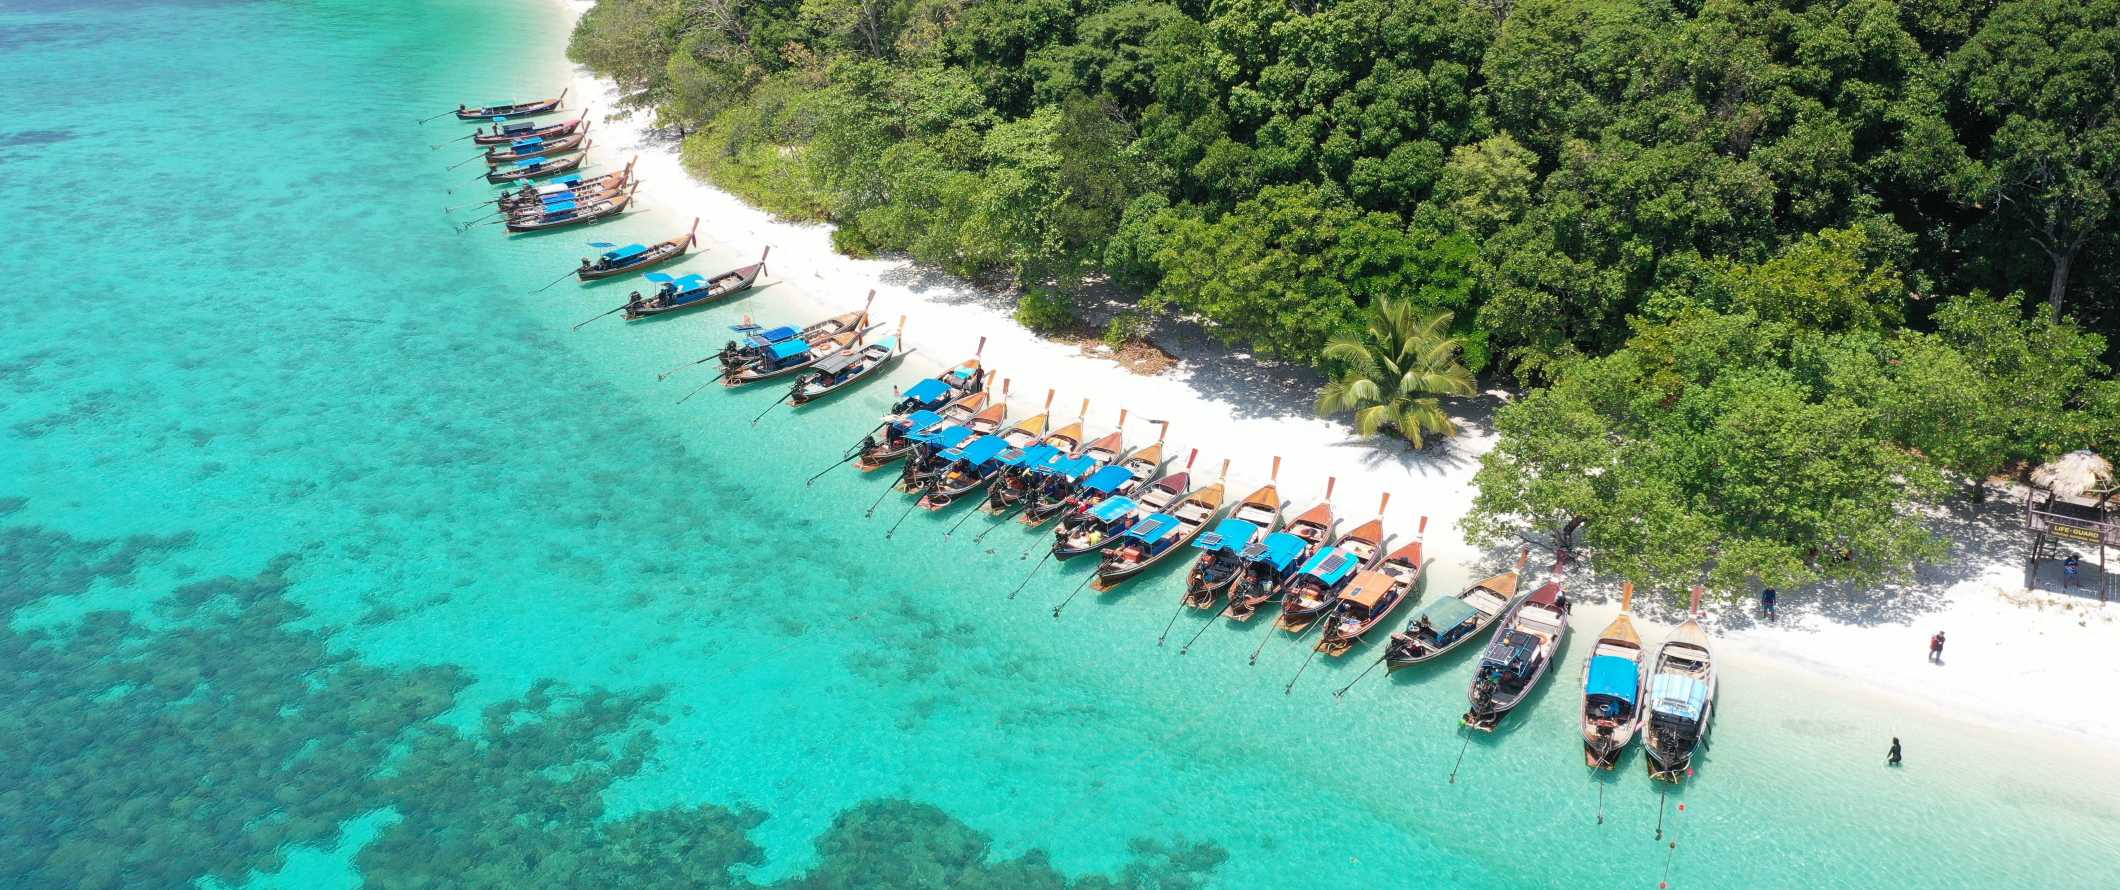 Aerial view of a line of longtail boats docked on a beach on the island of Ko Lipe, Thailand